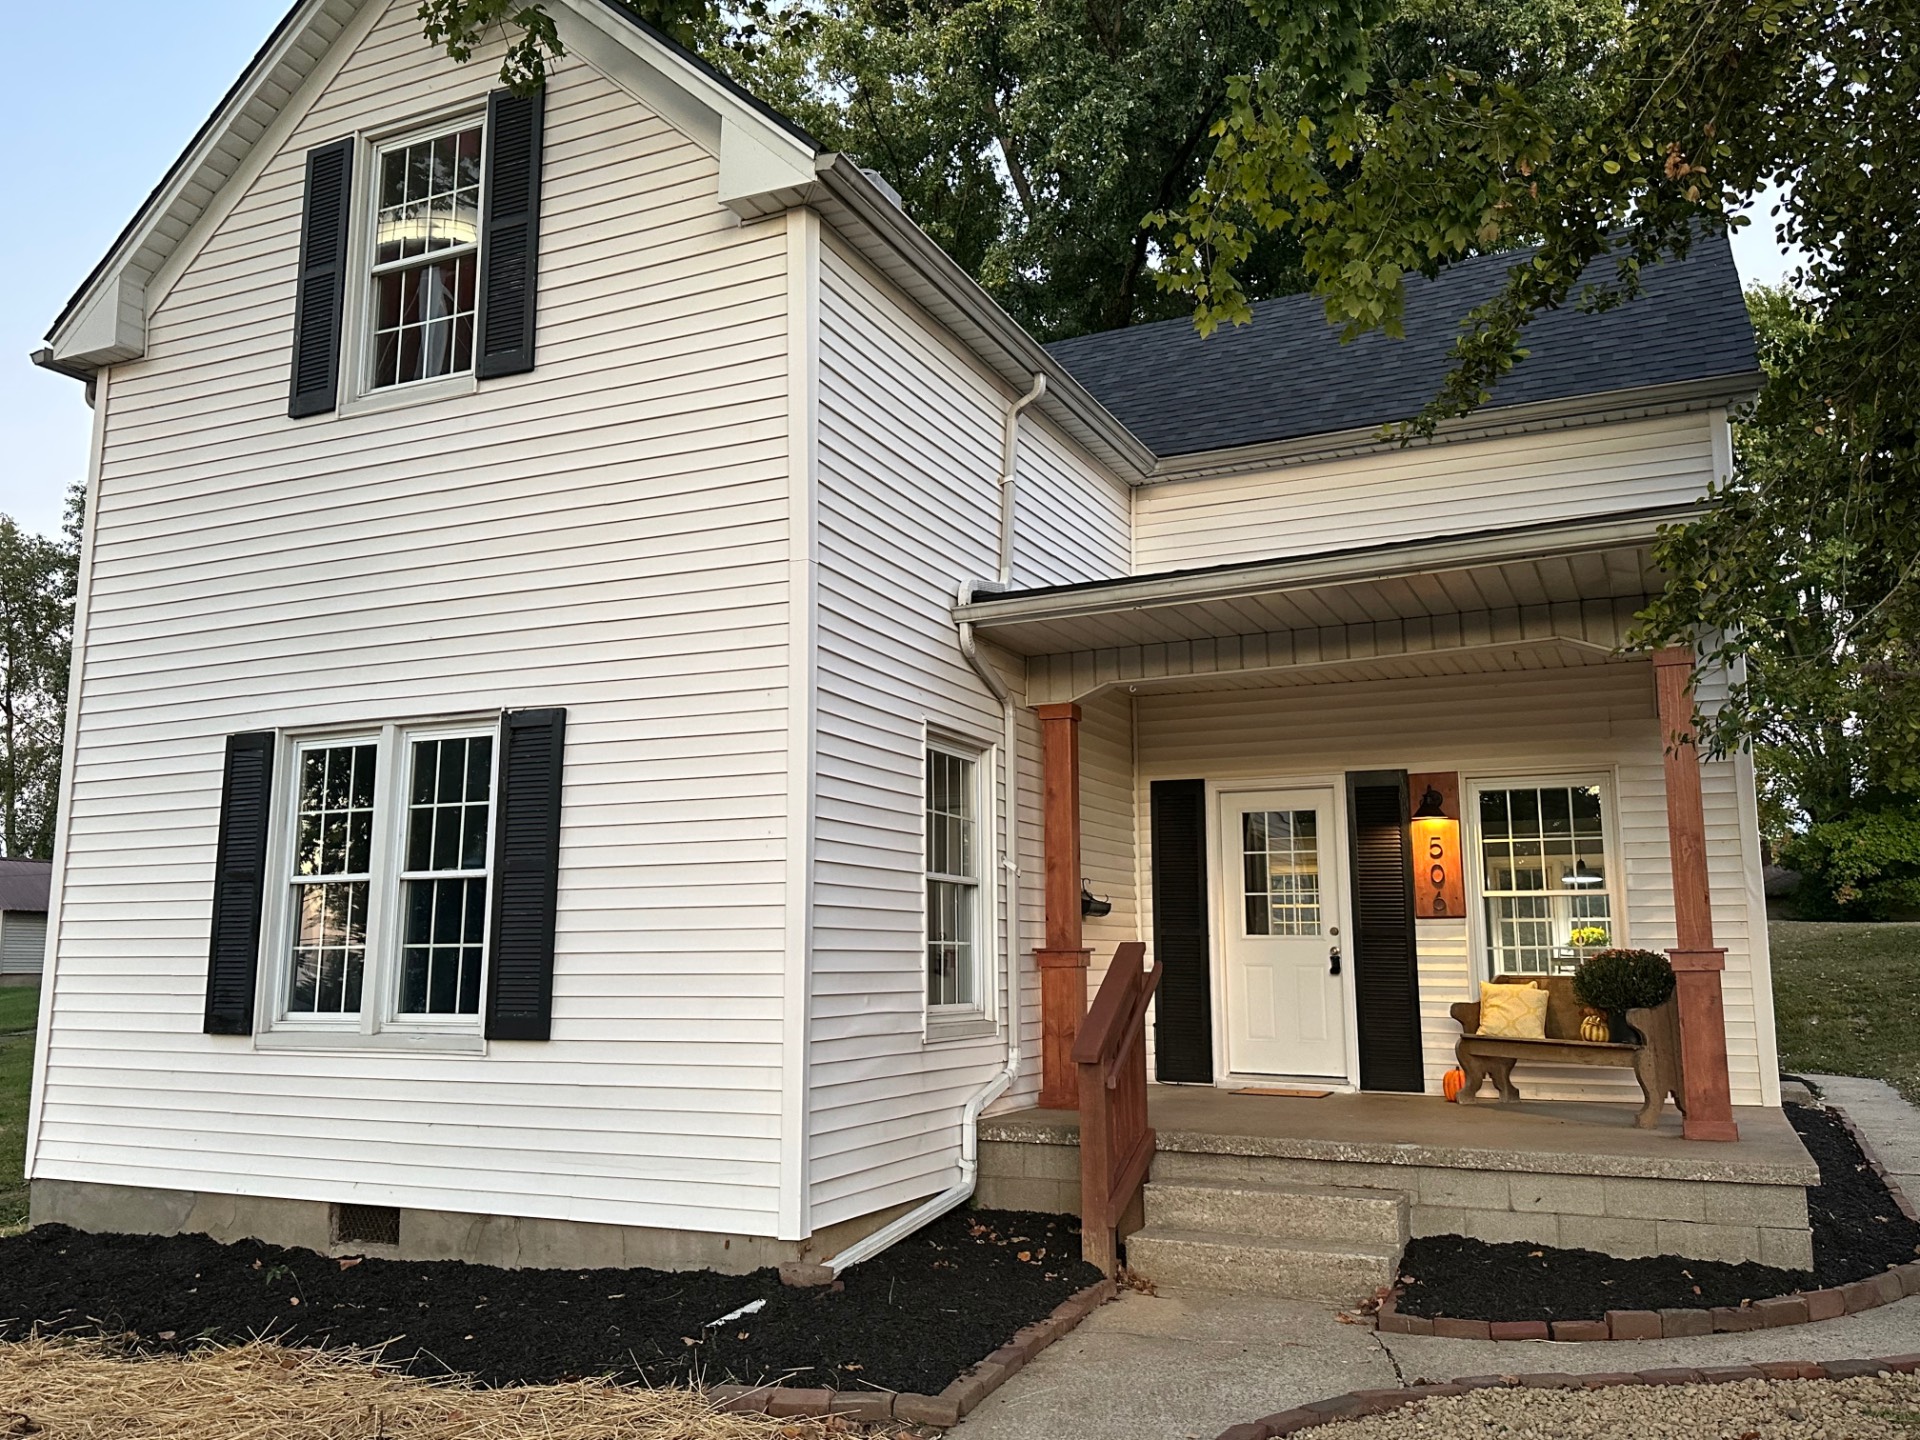 Remodel Just Completed, 4 Bed / 1.5 Bath Farmhouse Style Home!